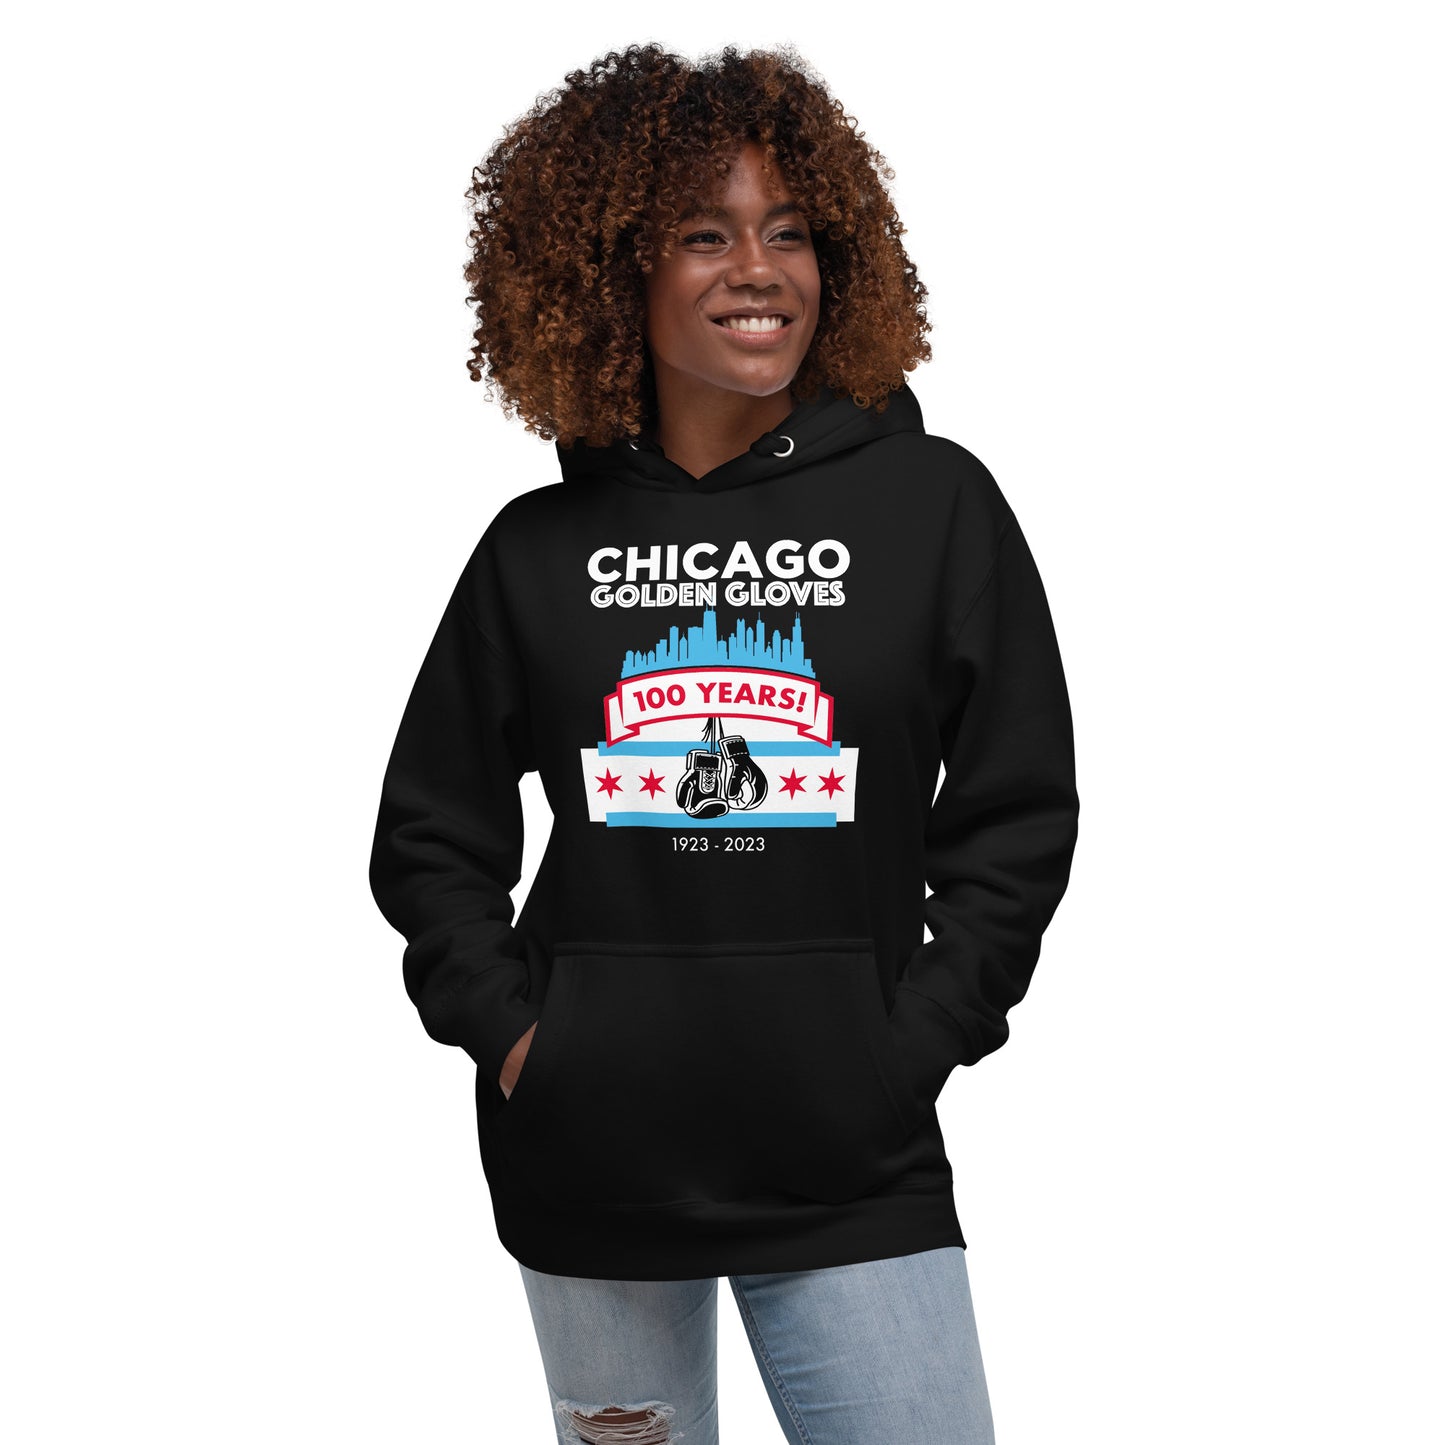 NEW! Unisex Chicago Golden Gloves Boxing 100th Anniversary Hoodie- City Style in Black